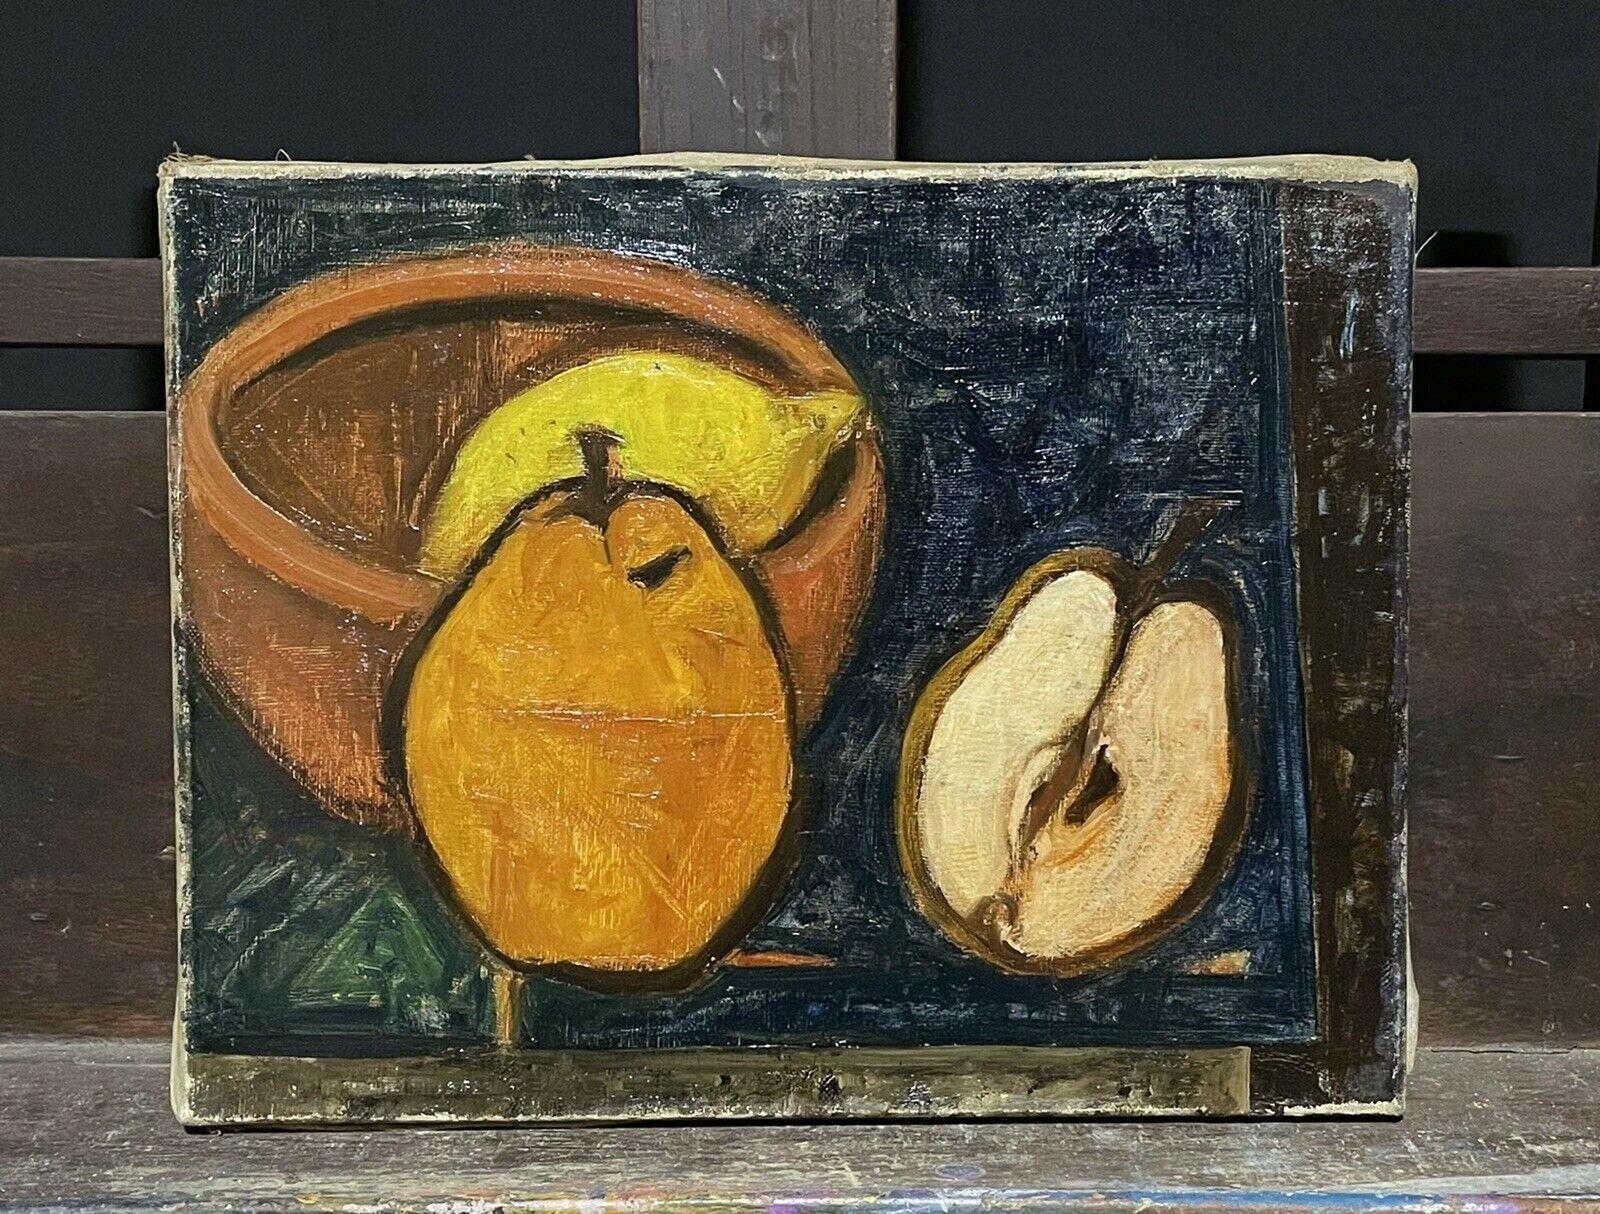 Artist/ School: French School, mid 20th century

Title: Still life of fruit

Medium:  oil painting on canvas, unframed

Size:  painting: 10.5 x 13.75 inches

Provenance: private collection, France

Condition: The painting is in good and pleasing